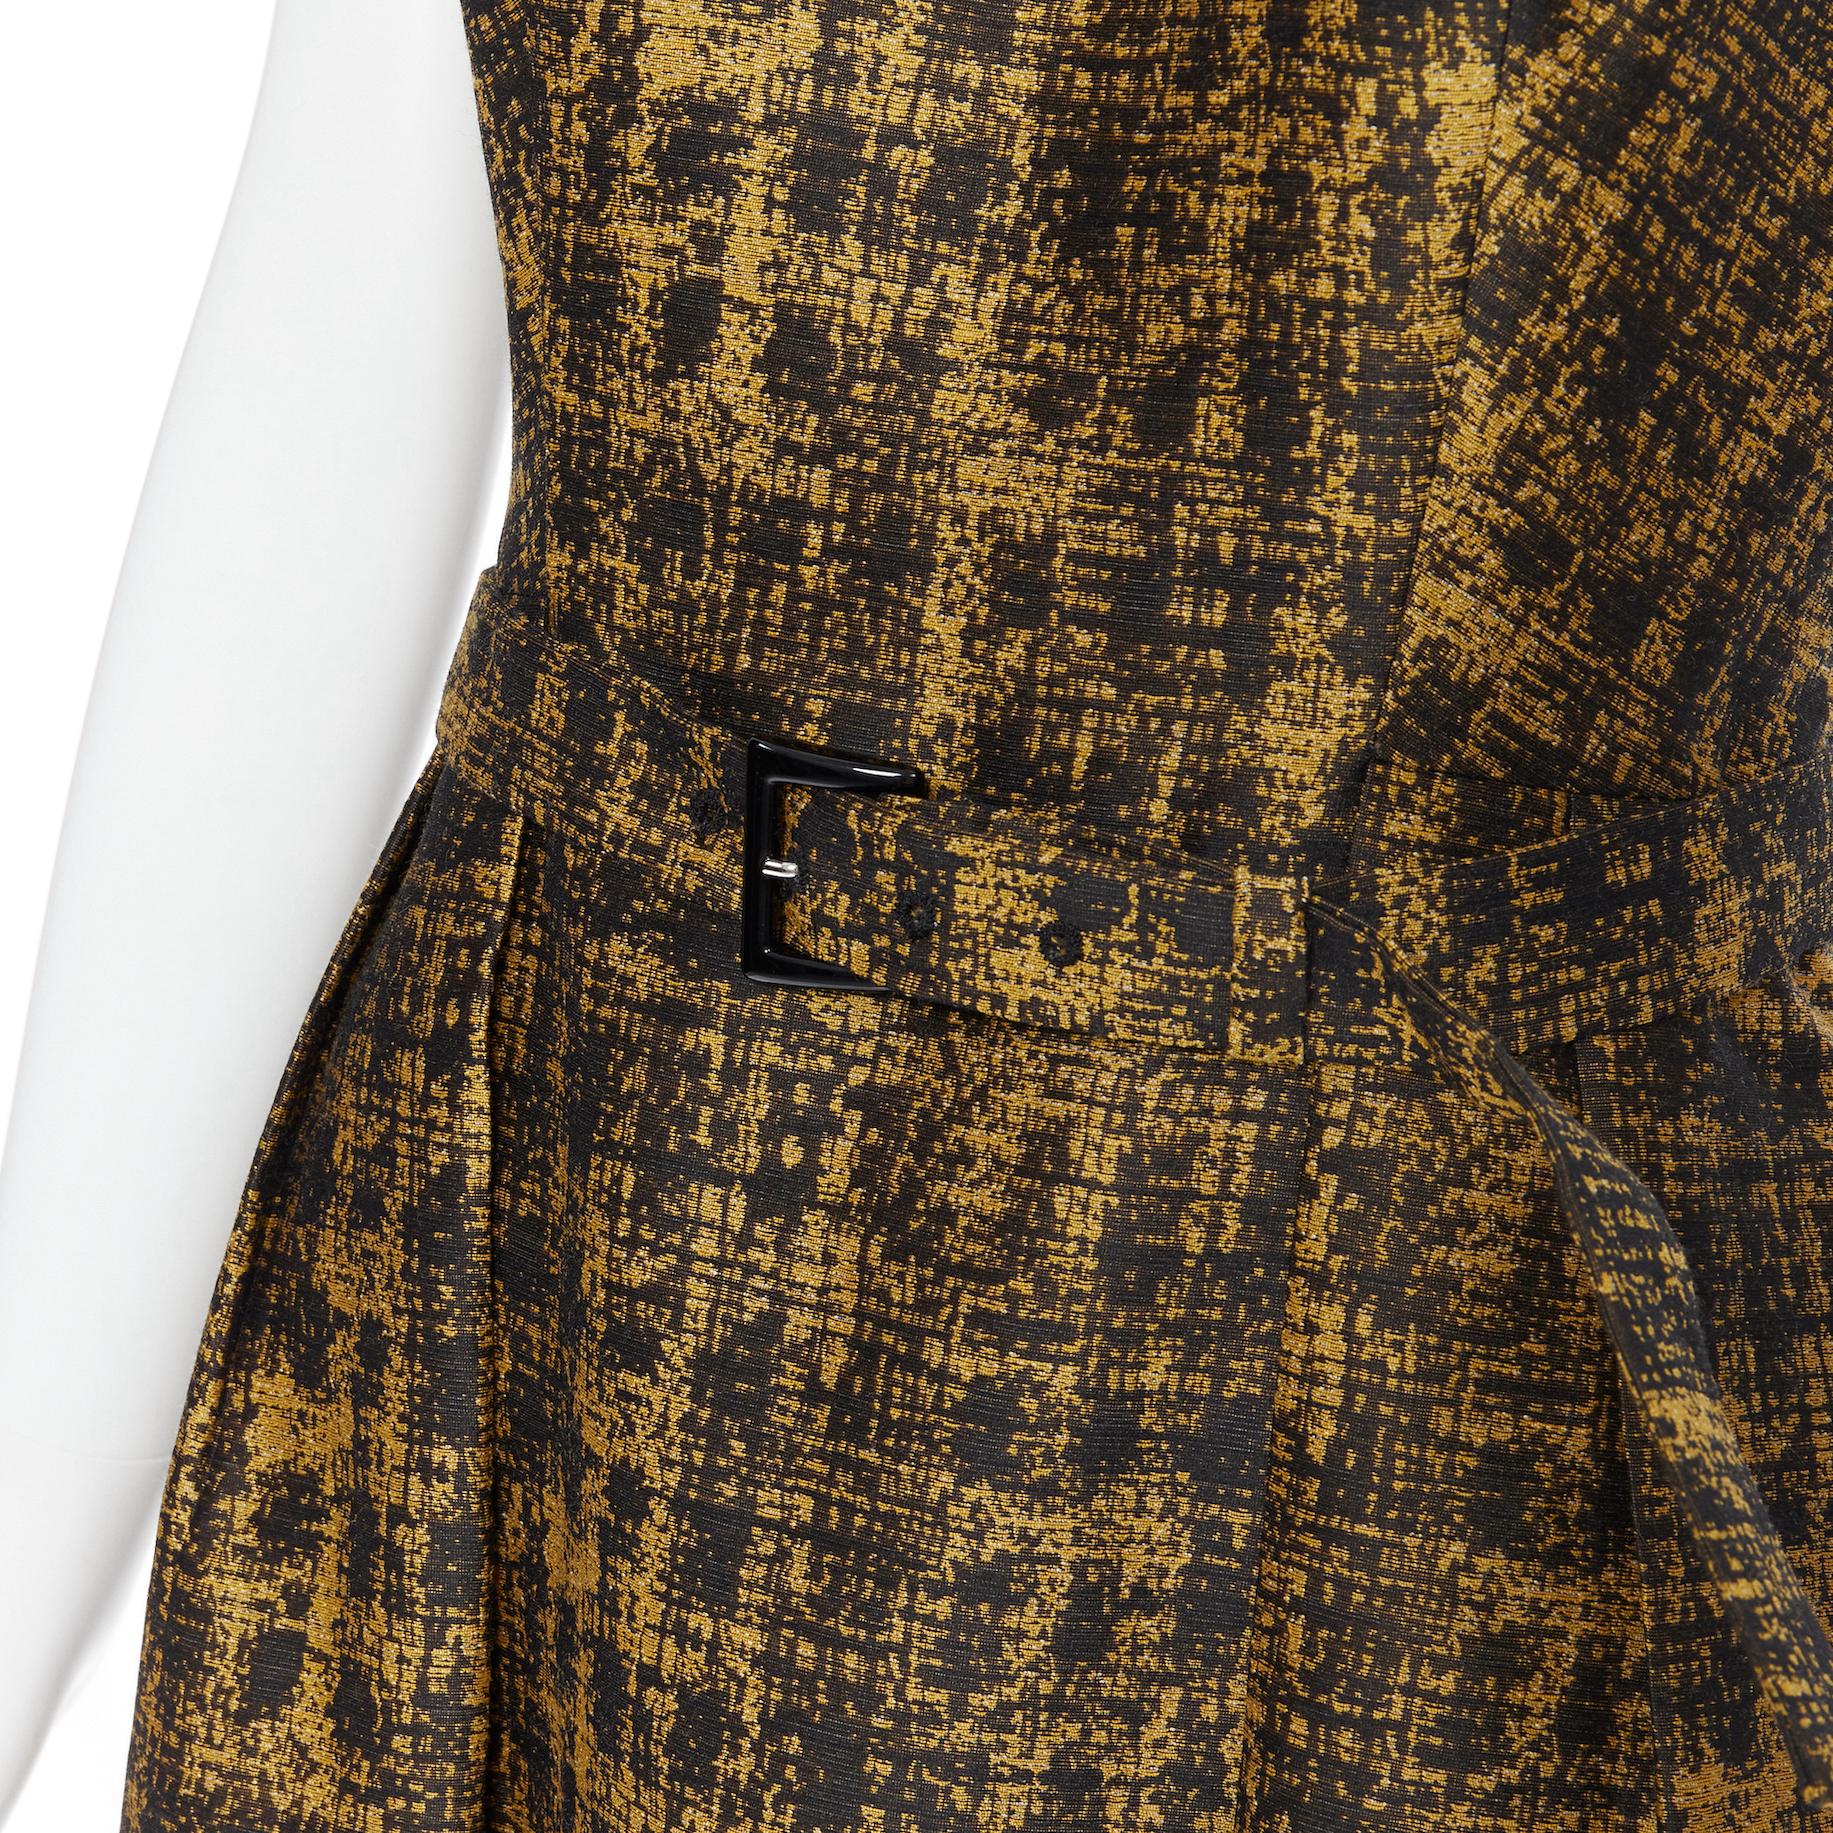 PRADA 2013 gold black wool silk jacquard cap sleeve belted A-line dress IT44 M Reference: AEMA/A00027 Brand: Prada Designer: Miuccia Prada Collection: 2014 Material: Wool Color: Gold Pattern: Abstract Closure: Zip Extra Detail: Boat neck. Cap